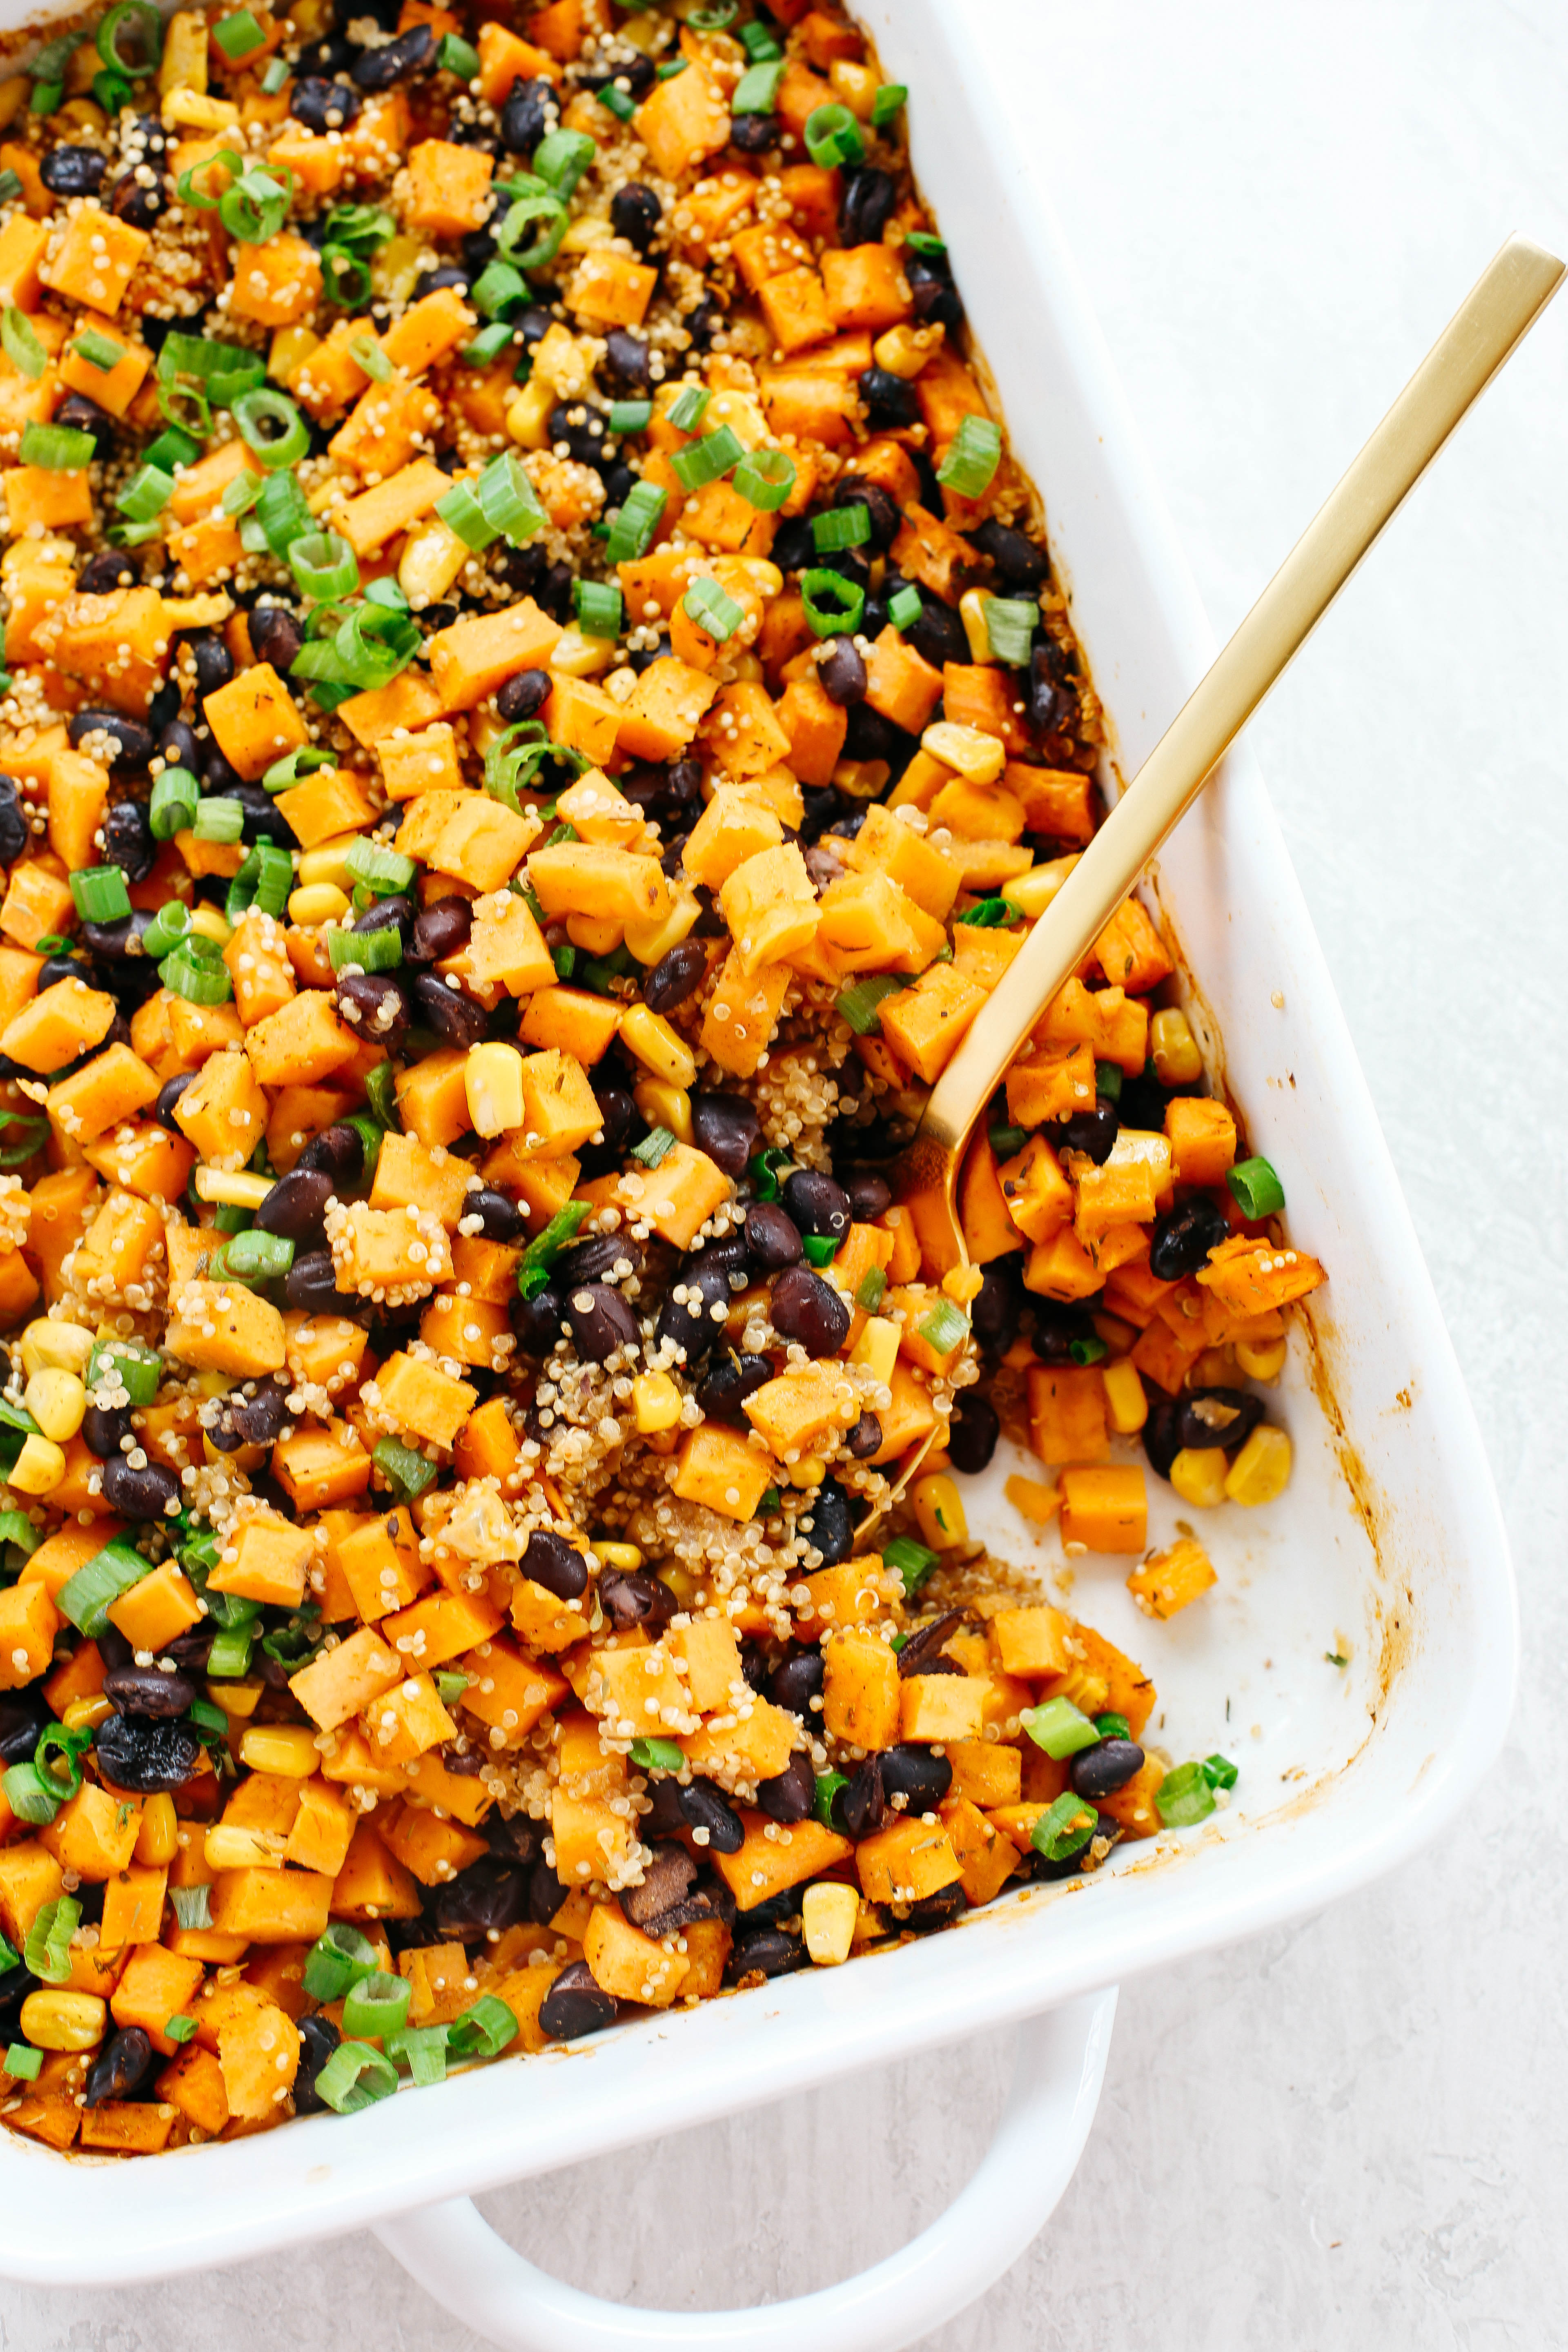 This Sweet Potato & Black Bean Quinoa Bake is healthy and delicious with all your favorite Mexican flavors easily baked together in a single casserole dish! #glutenfree #dairyfree #vegan #mealprep